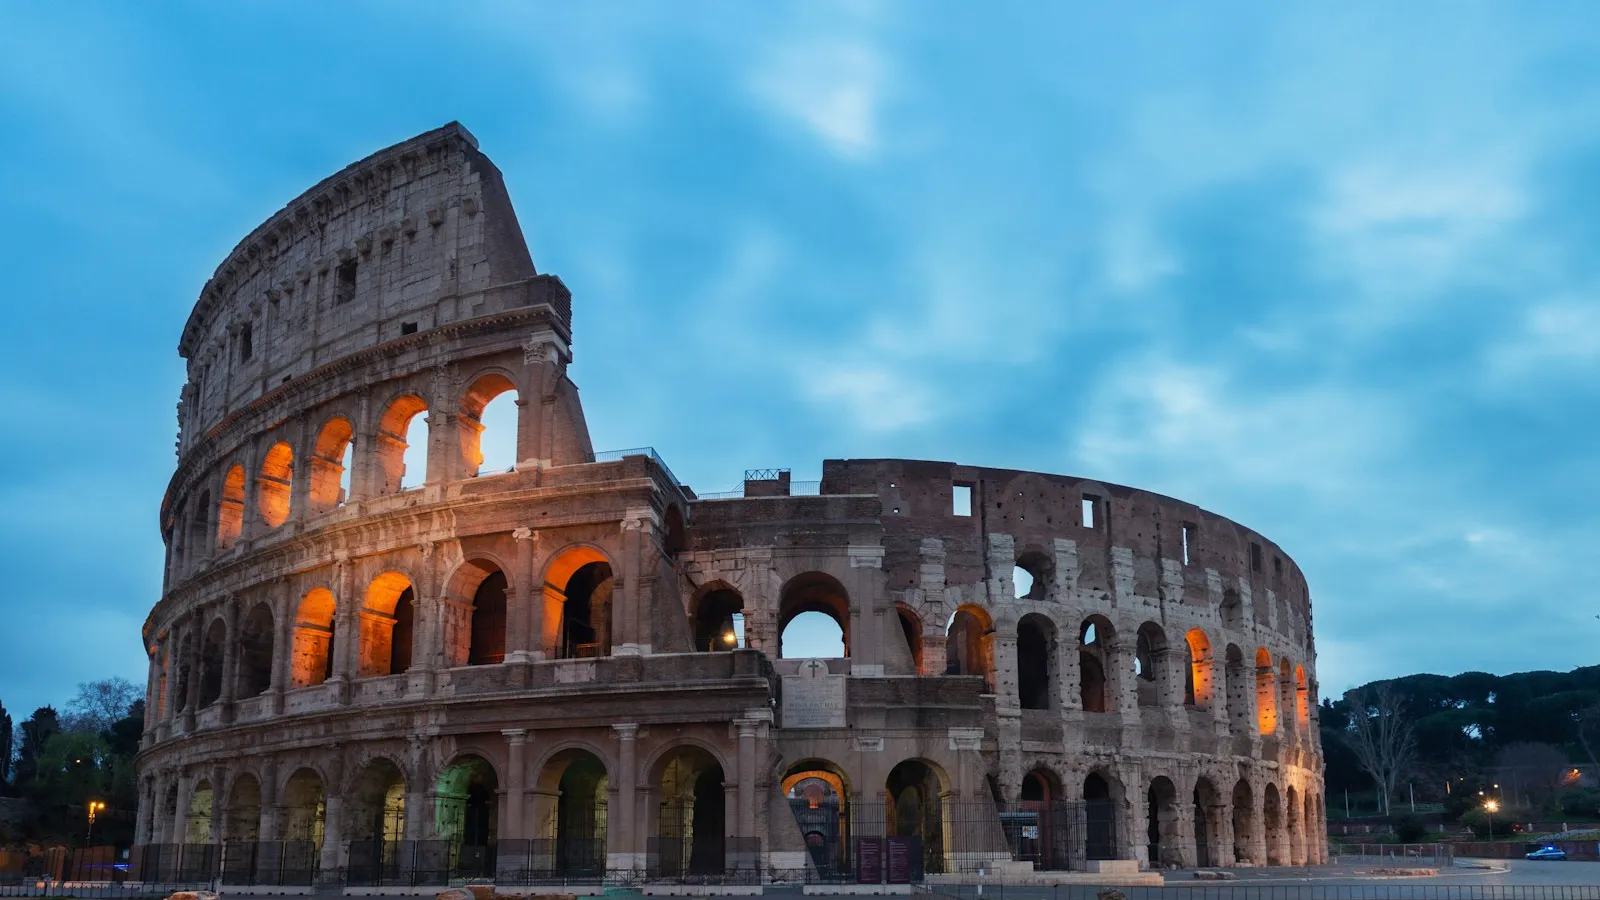 A look at the most common scams targeting tourists in Rome, from pickpockets to money exchange rip-offs, and how to avoid becoming a victim.